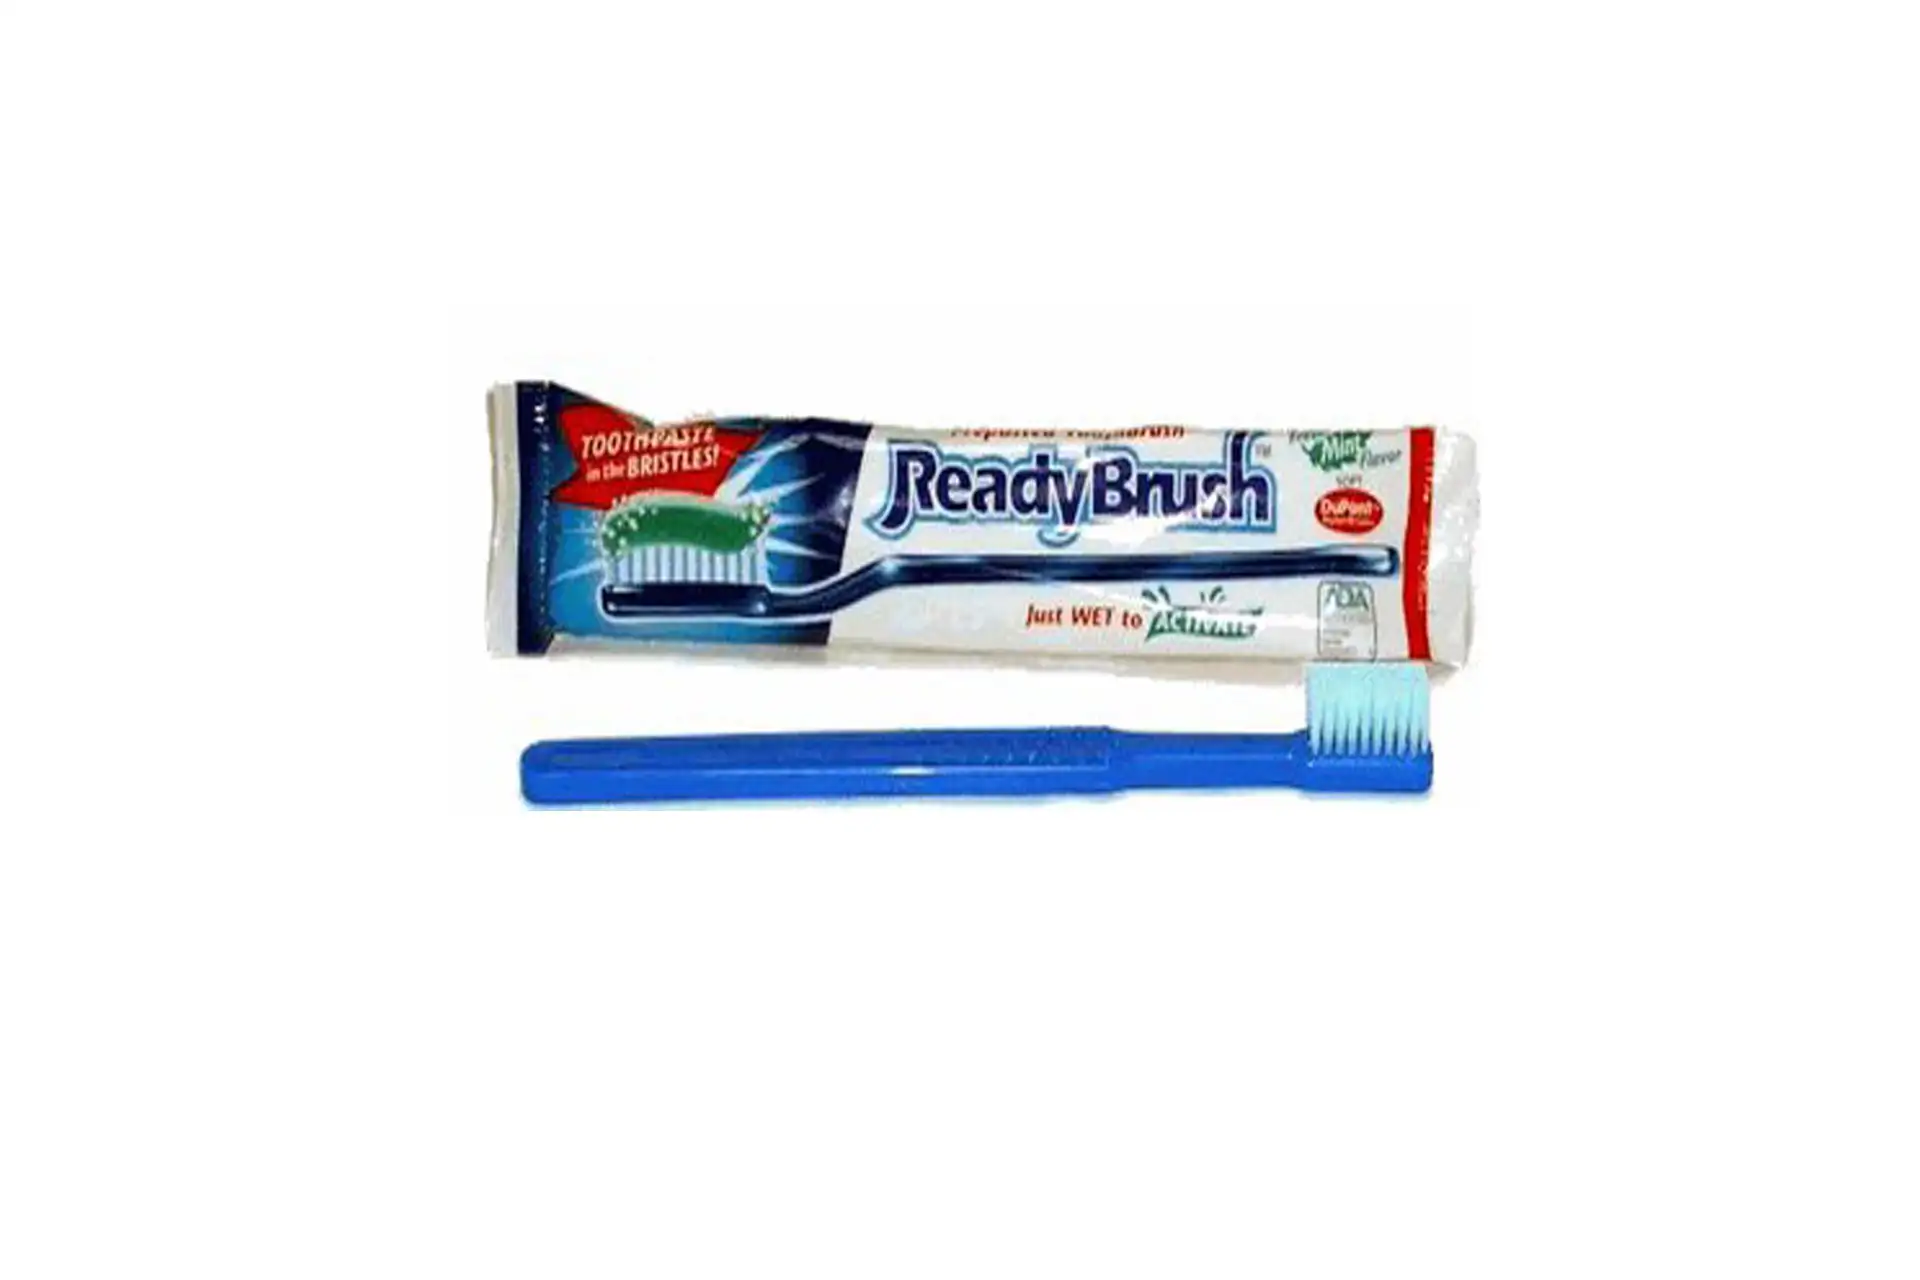 Toothpaste and toothbrush; Courtesy of Amazon